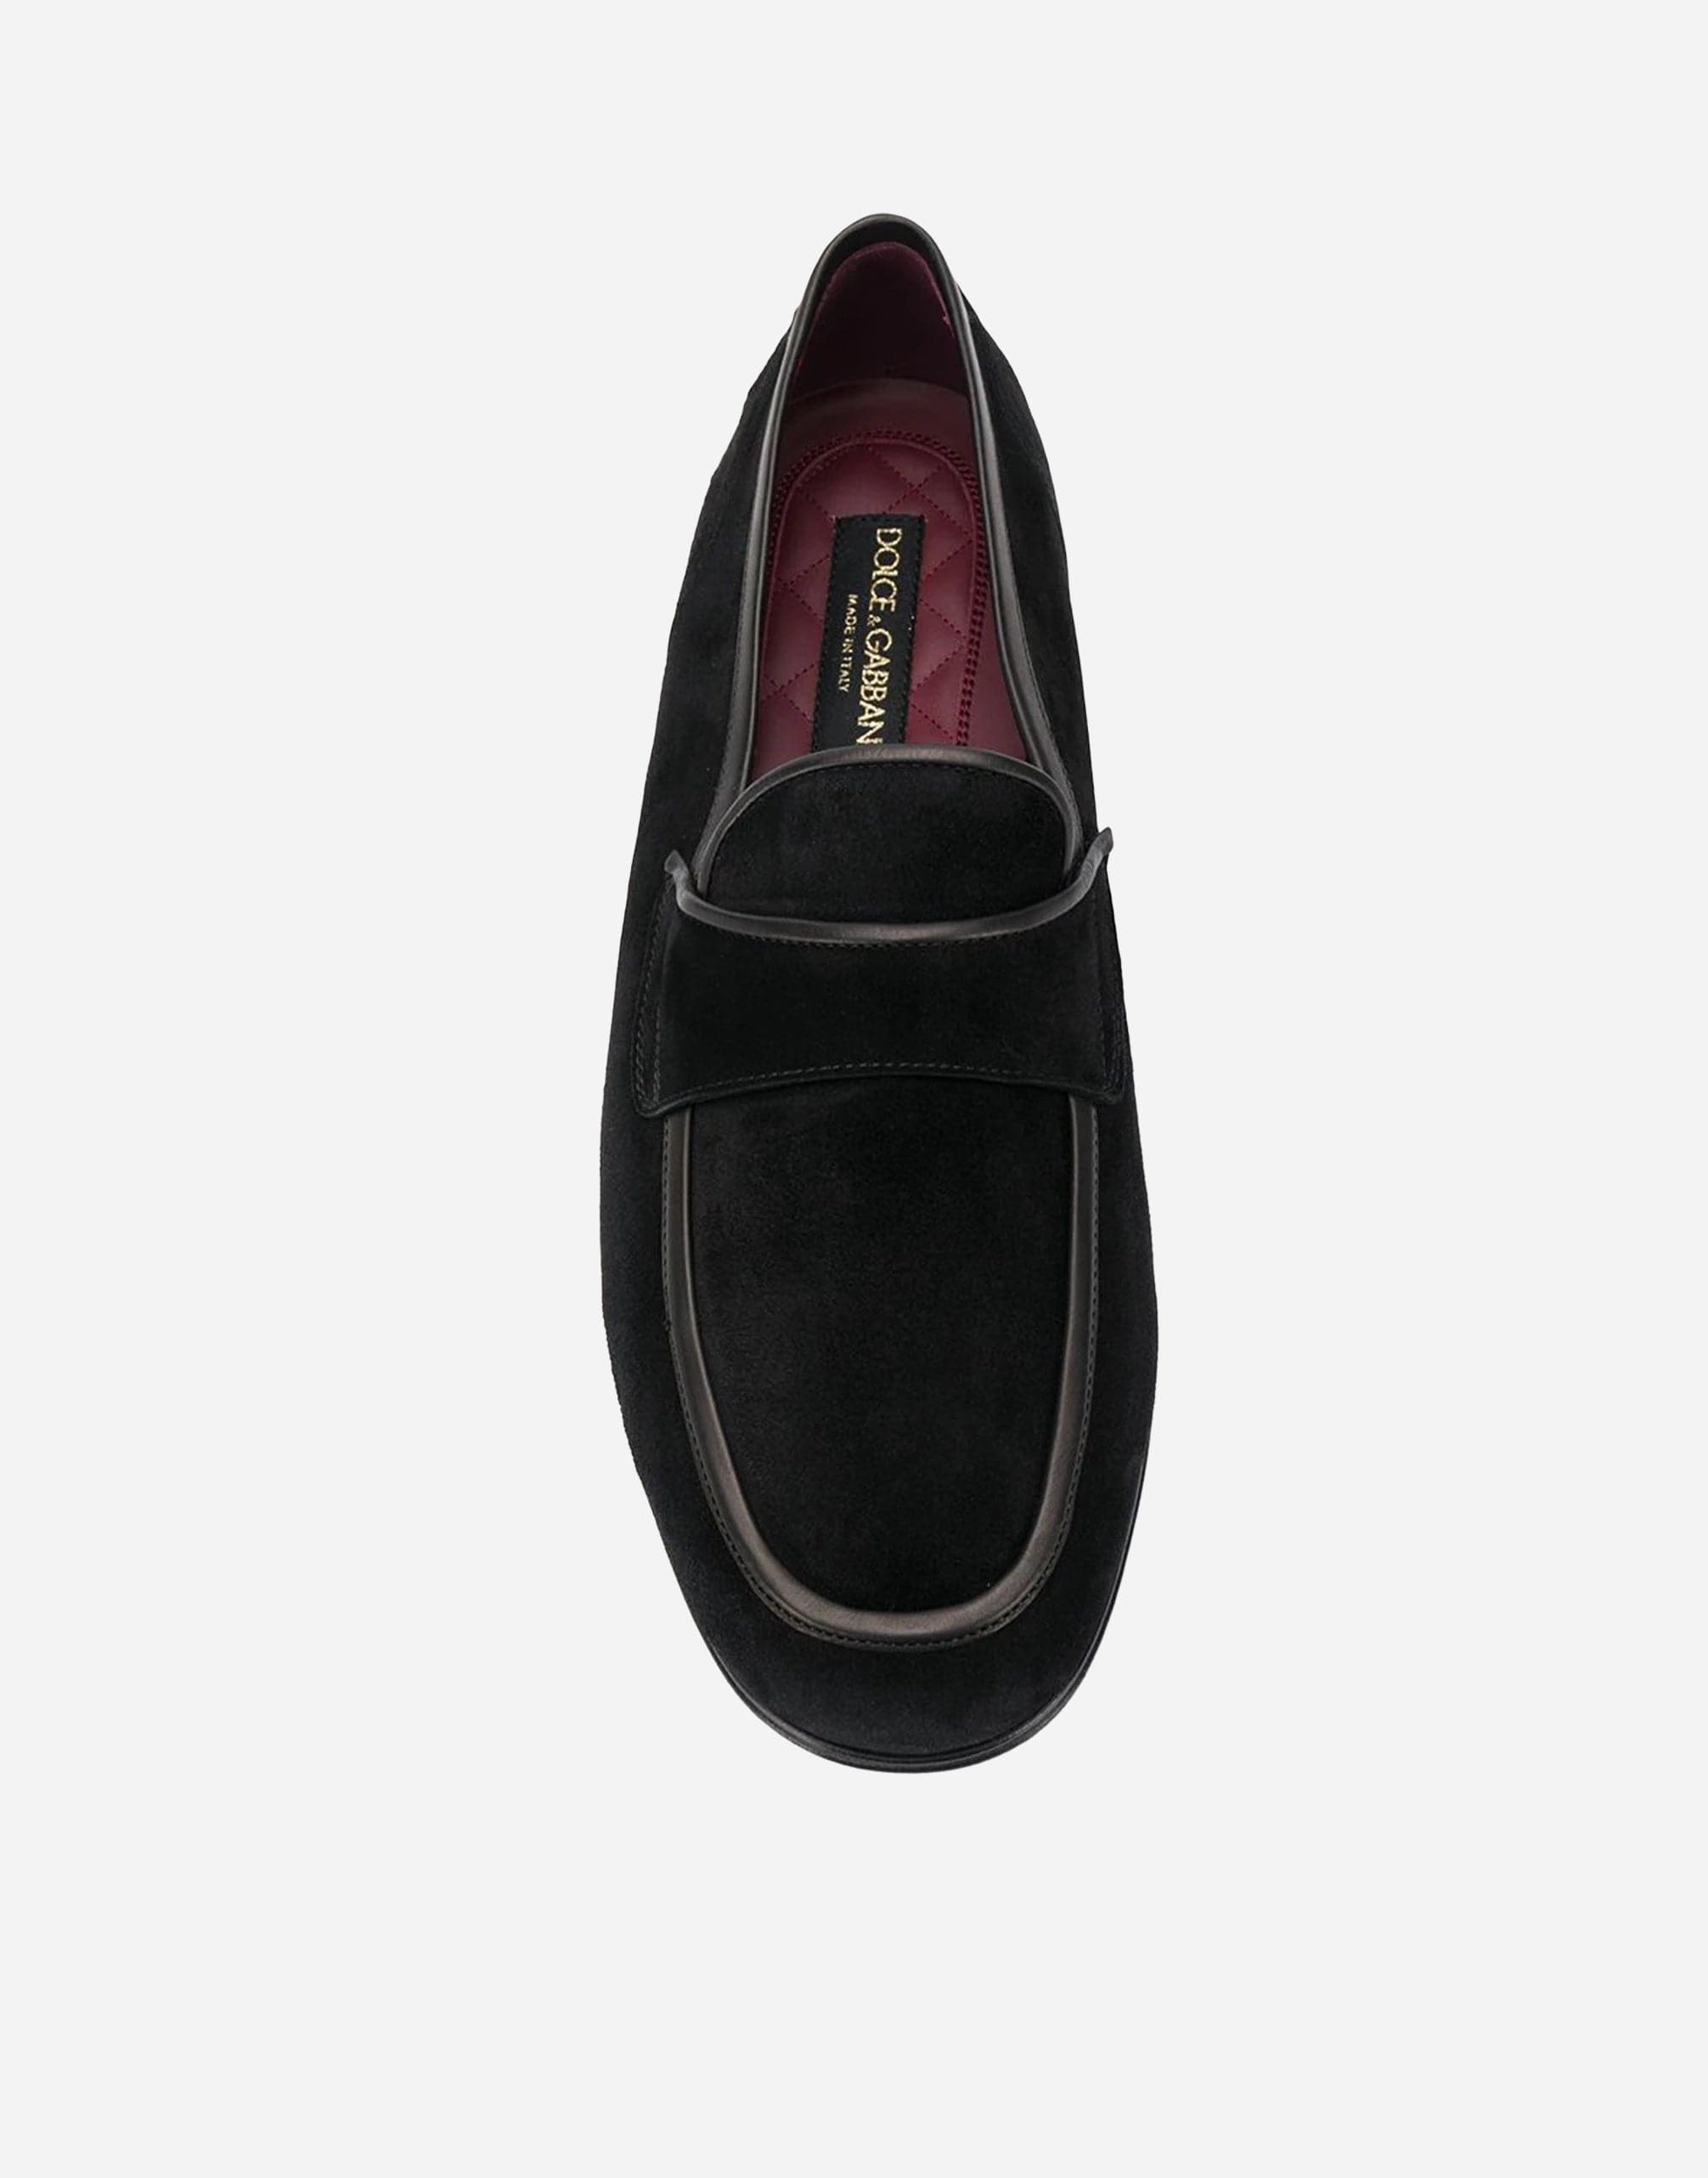 Dolce & Gabbana Contrast Trims Loafers